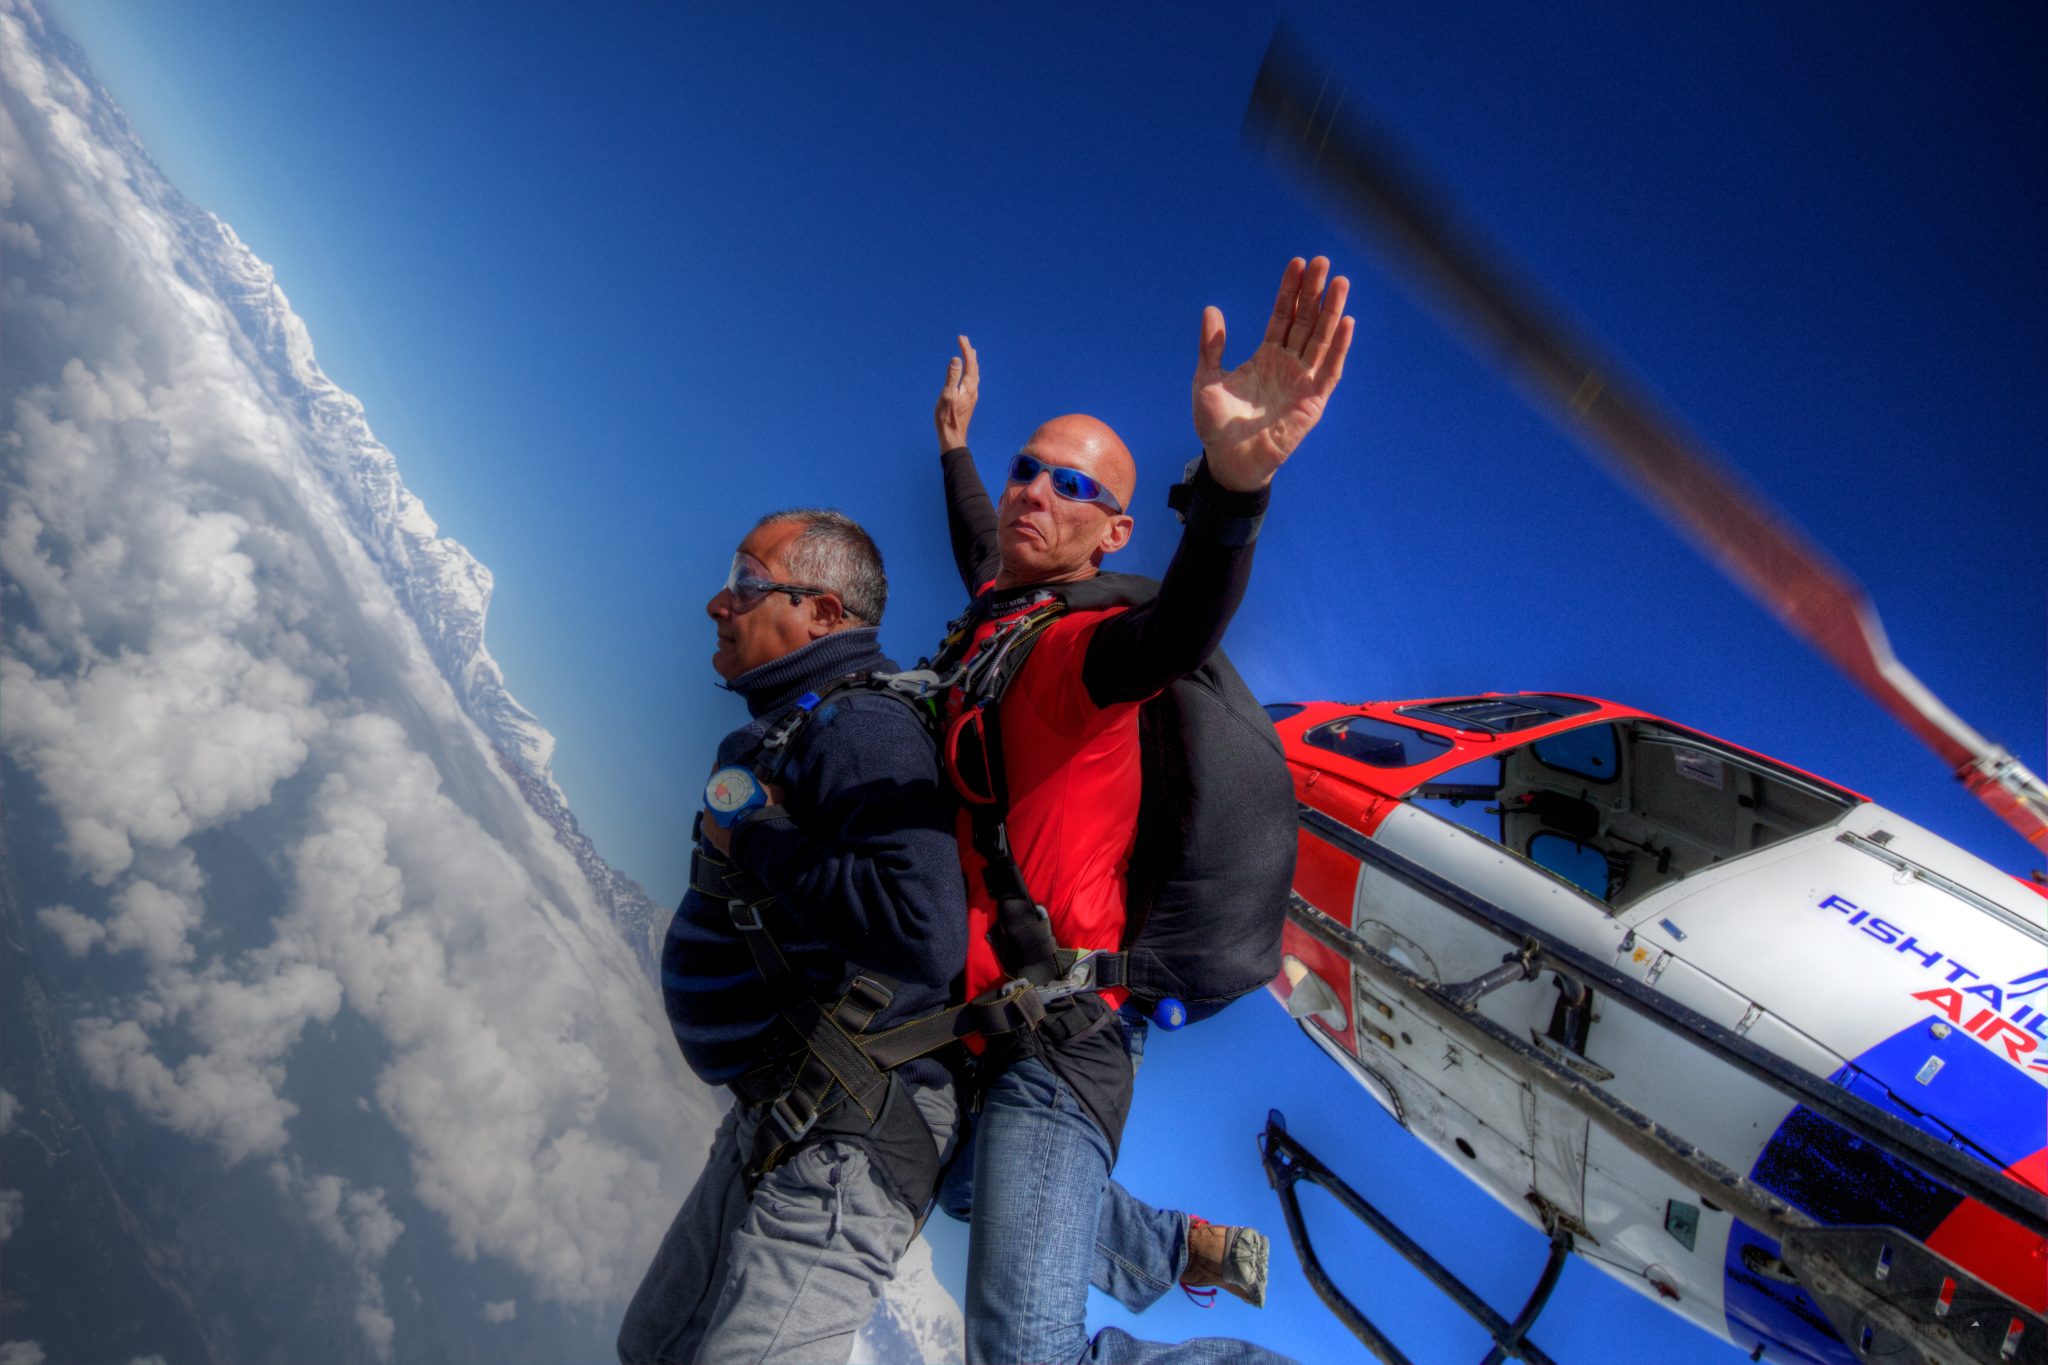 Skydiving – a new adventure in Pokhara.